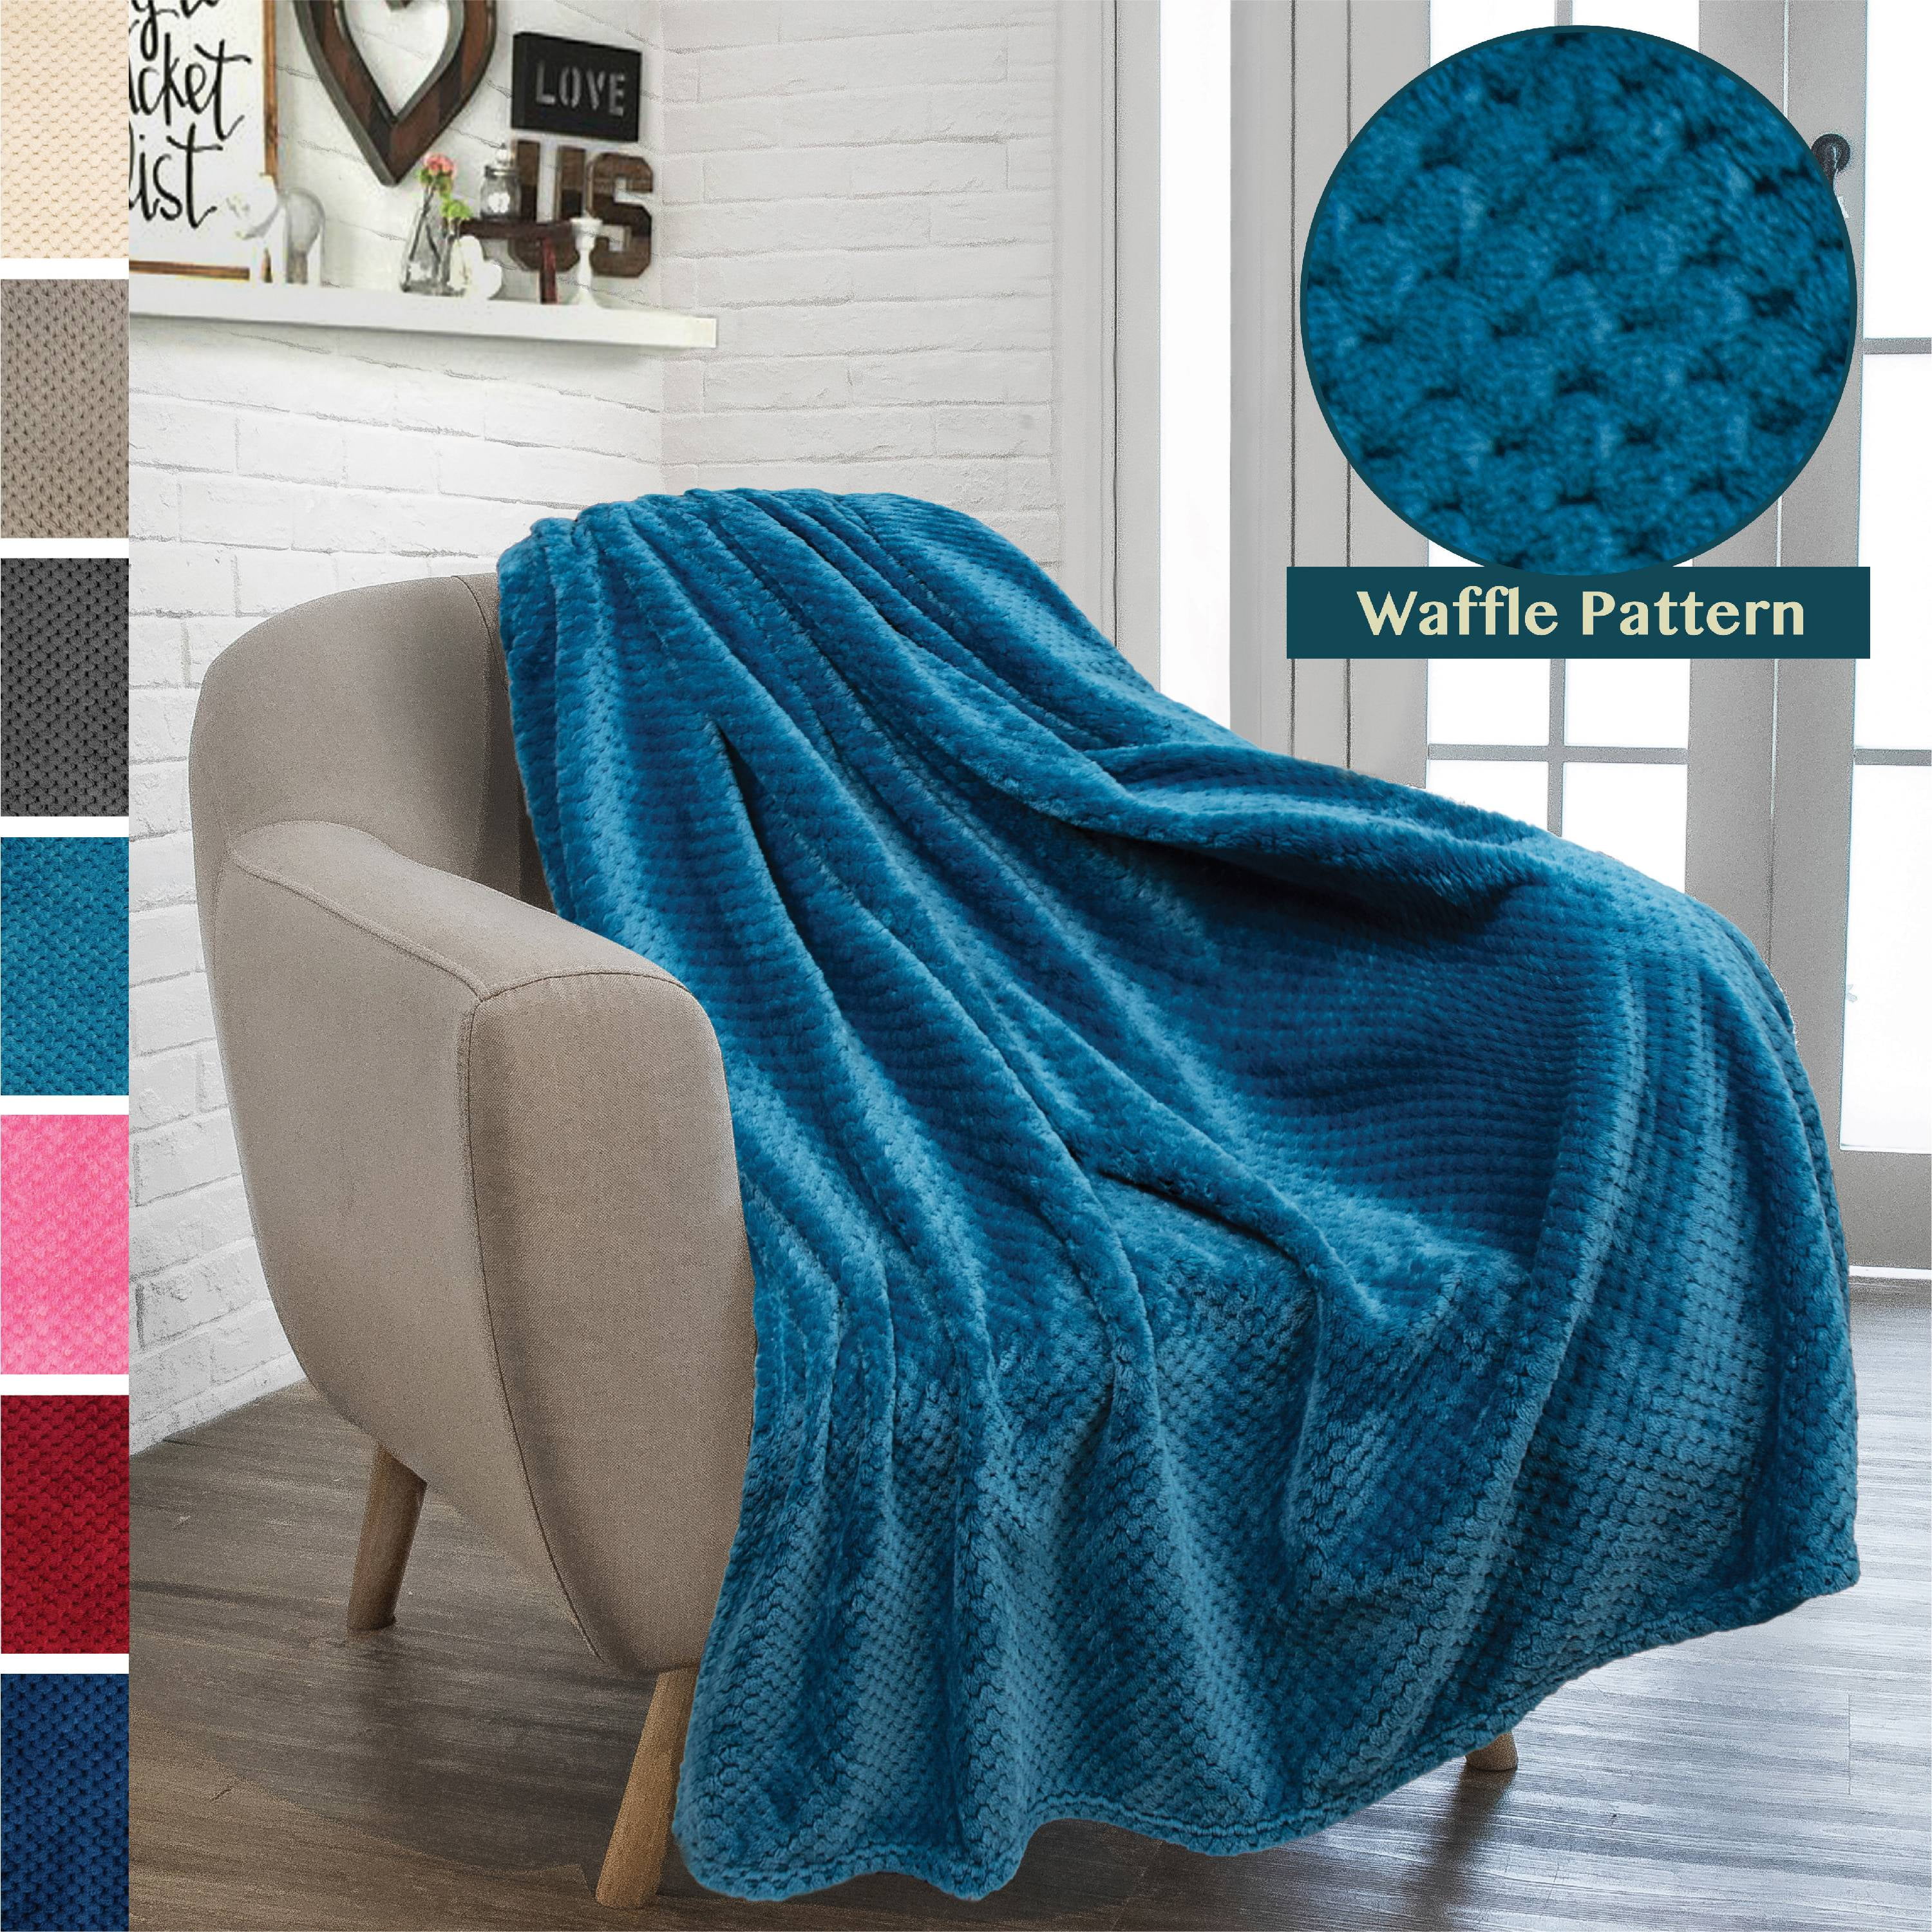 Home/Travel/Camping Applicable Moslion Soft Cozy Throw Blanket Wooden Dreamy Abstract Lavender Blue Fuzzy Warm Couch/Bed Blanket for Adult/Youth Polyester 50 X 60 Inches 